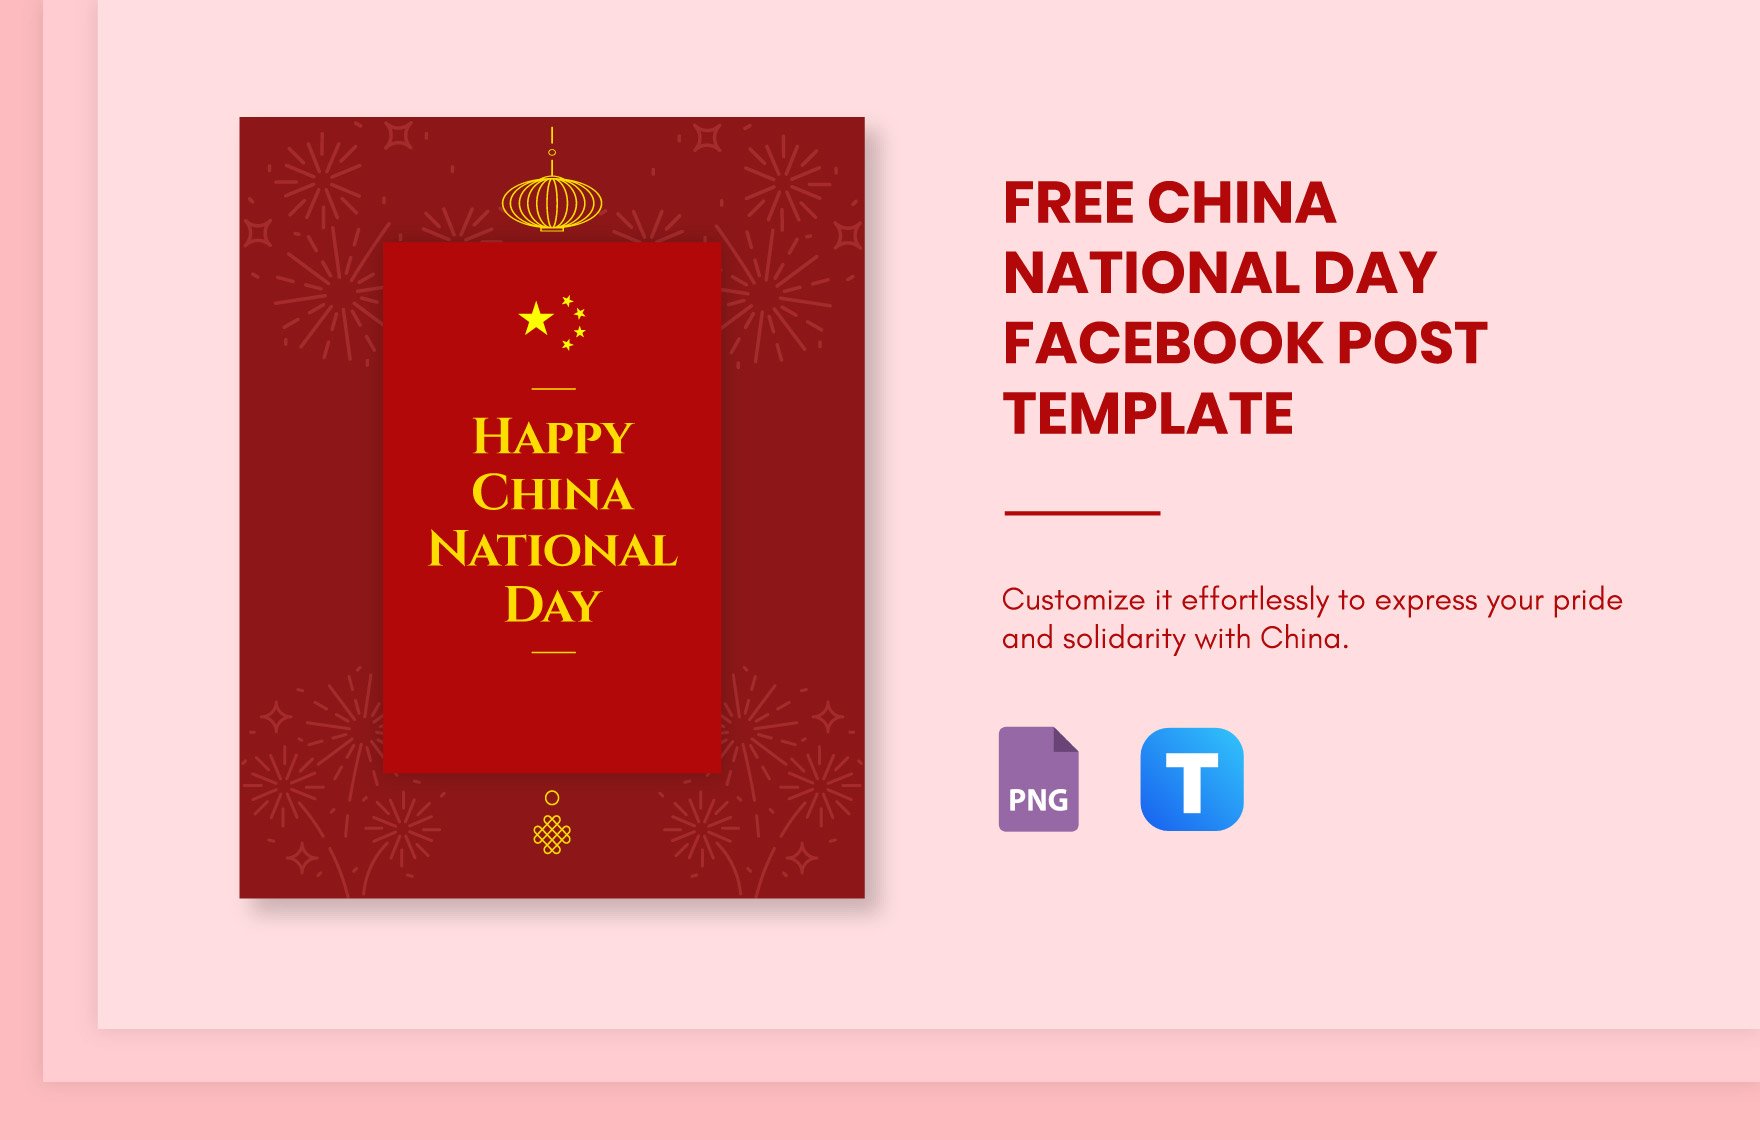 Free China National Day Facebook Post Template in PNG